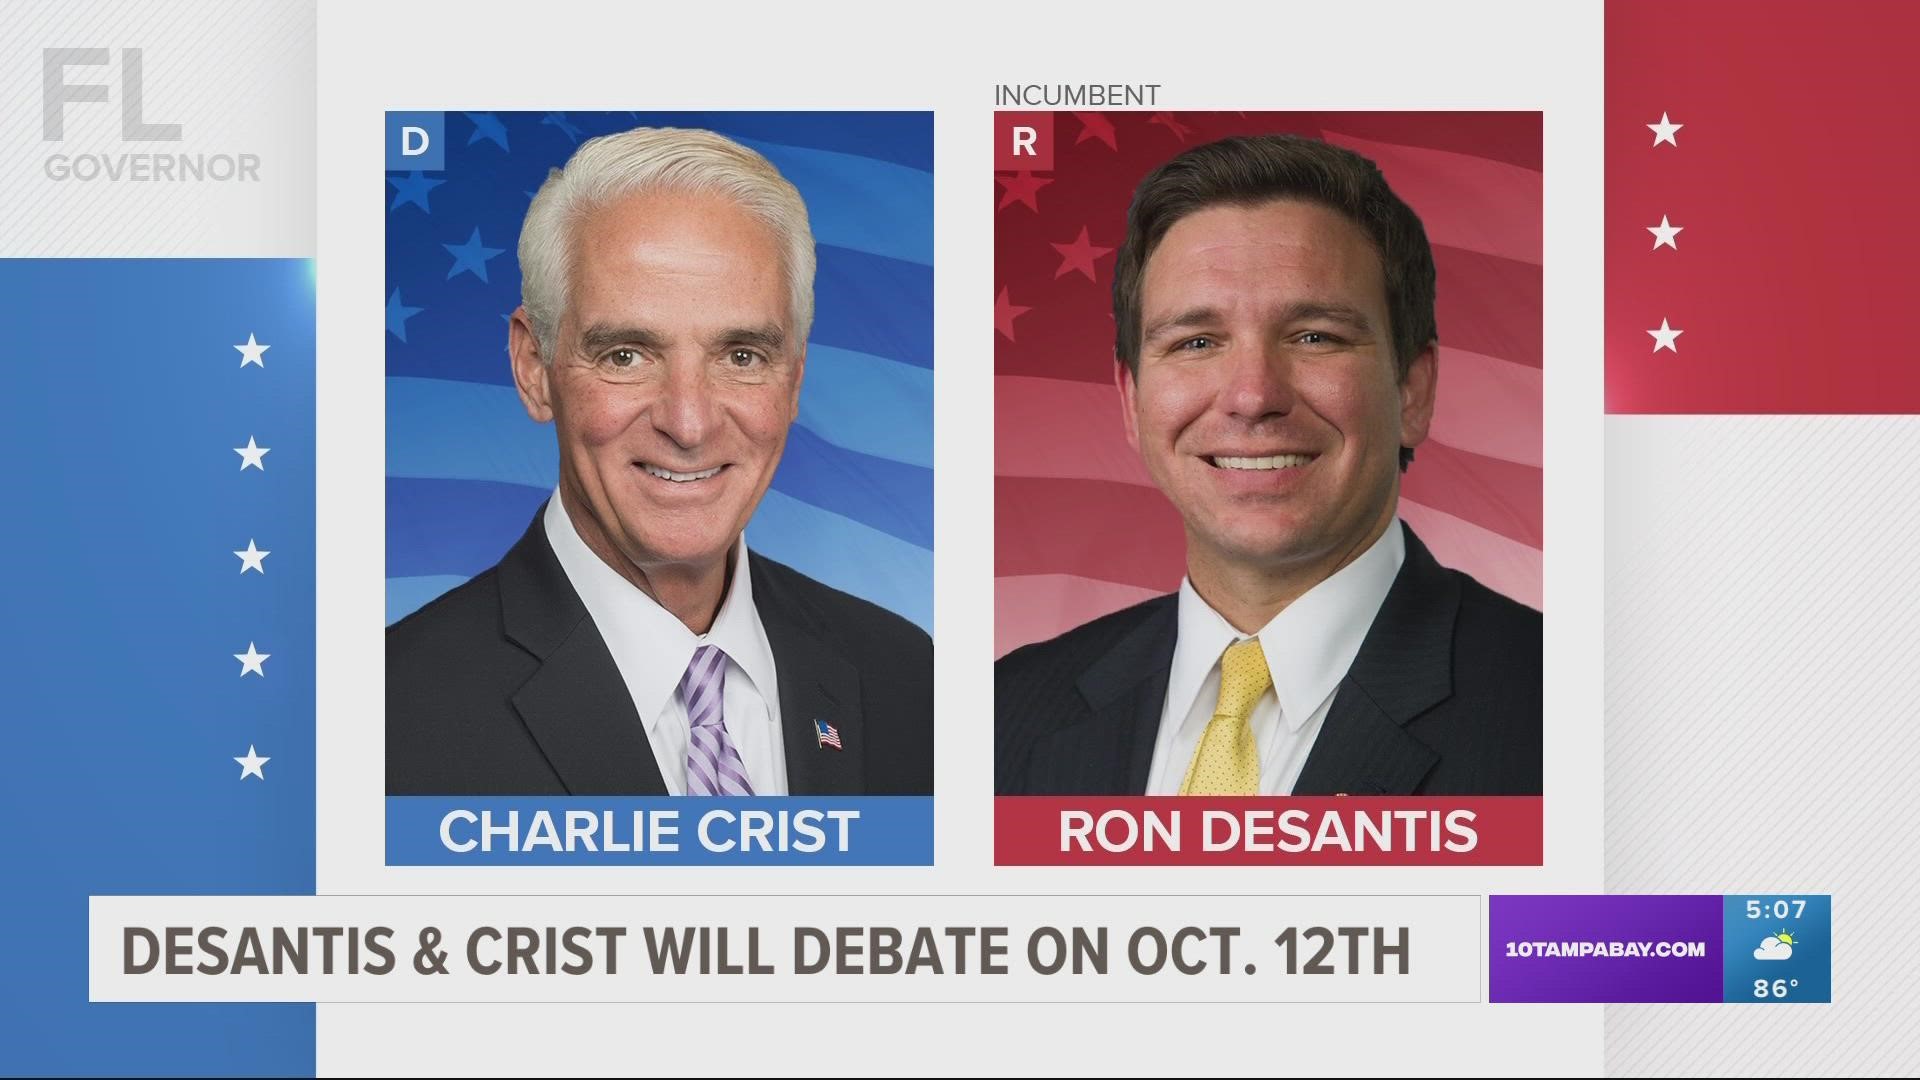 Crist says he has agreed to do three gubernatorial debates; DeSantis' campaign confirmed he would participate in one.